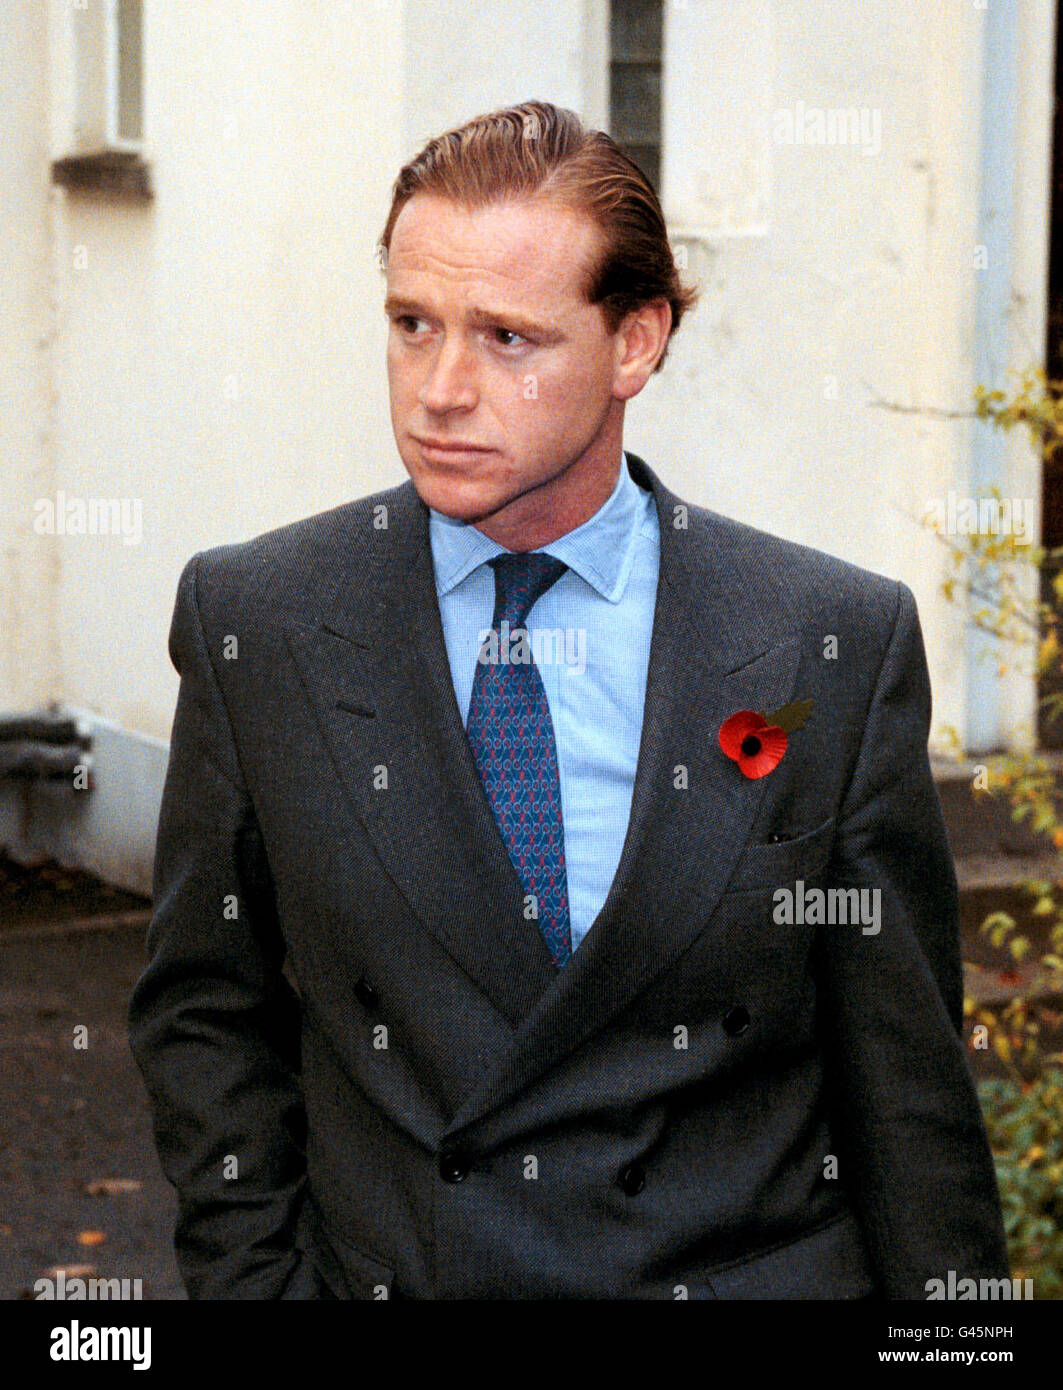 Former Cavalry officer James Hewitt leaves Okehampton Magistrates Court, Devon today (Thursday) after appearing on a drink-driving charge. The case was adjourned until November 14. Stock Photo